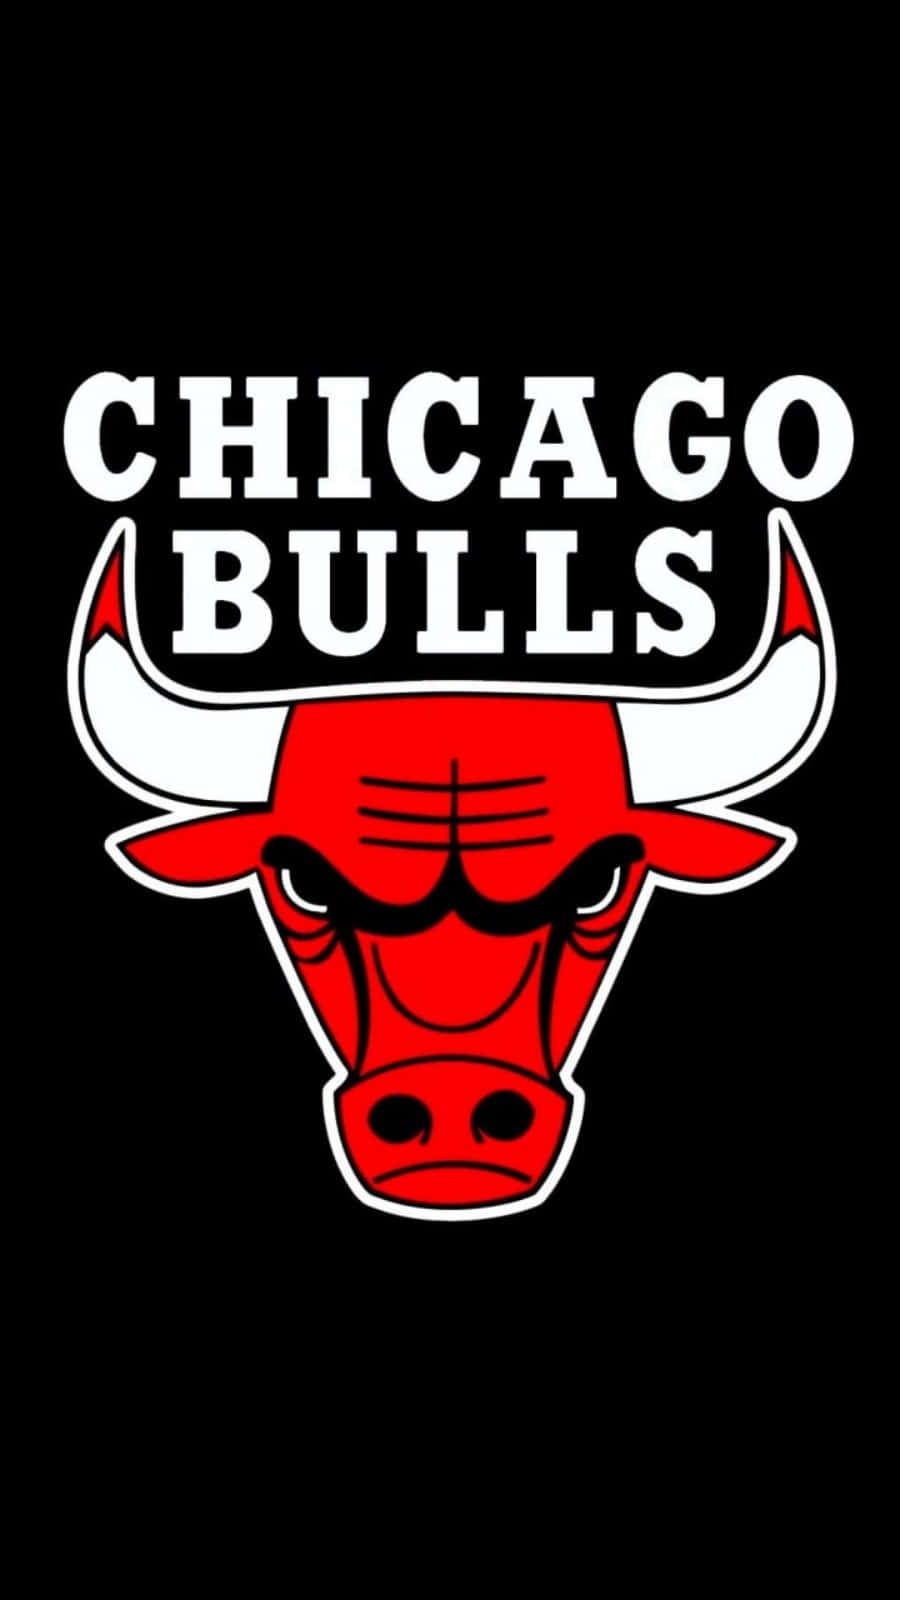 Show your Chicago Bulls pride on your cell phone! Wallpaper